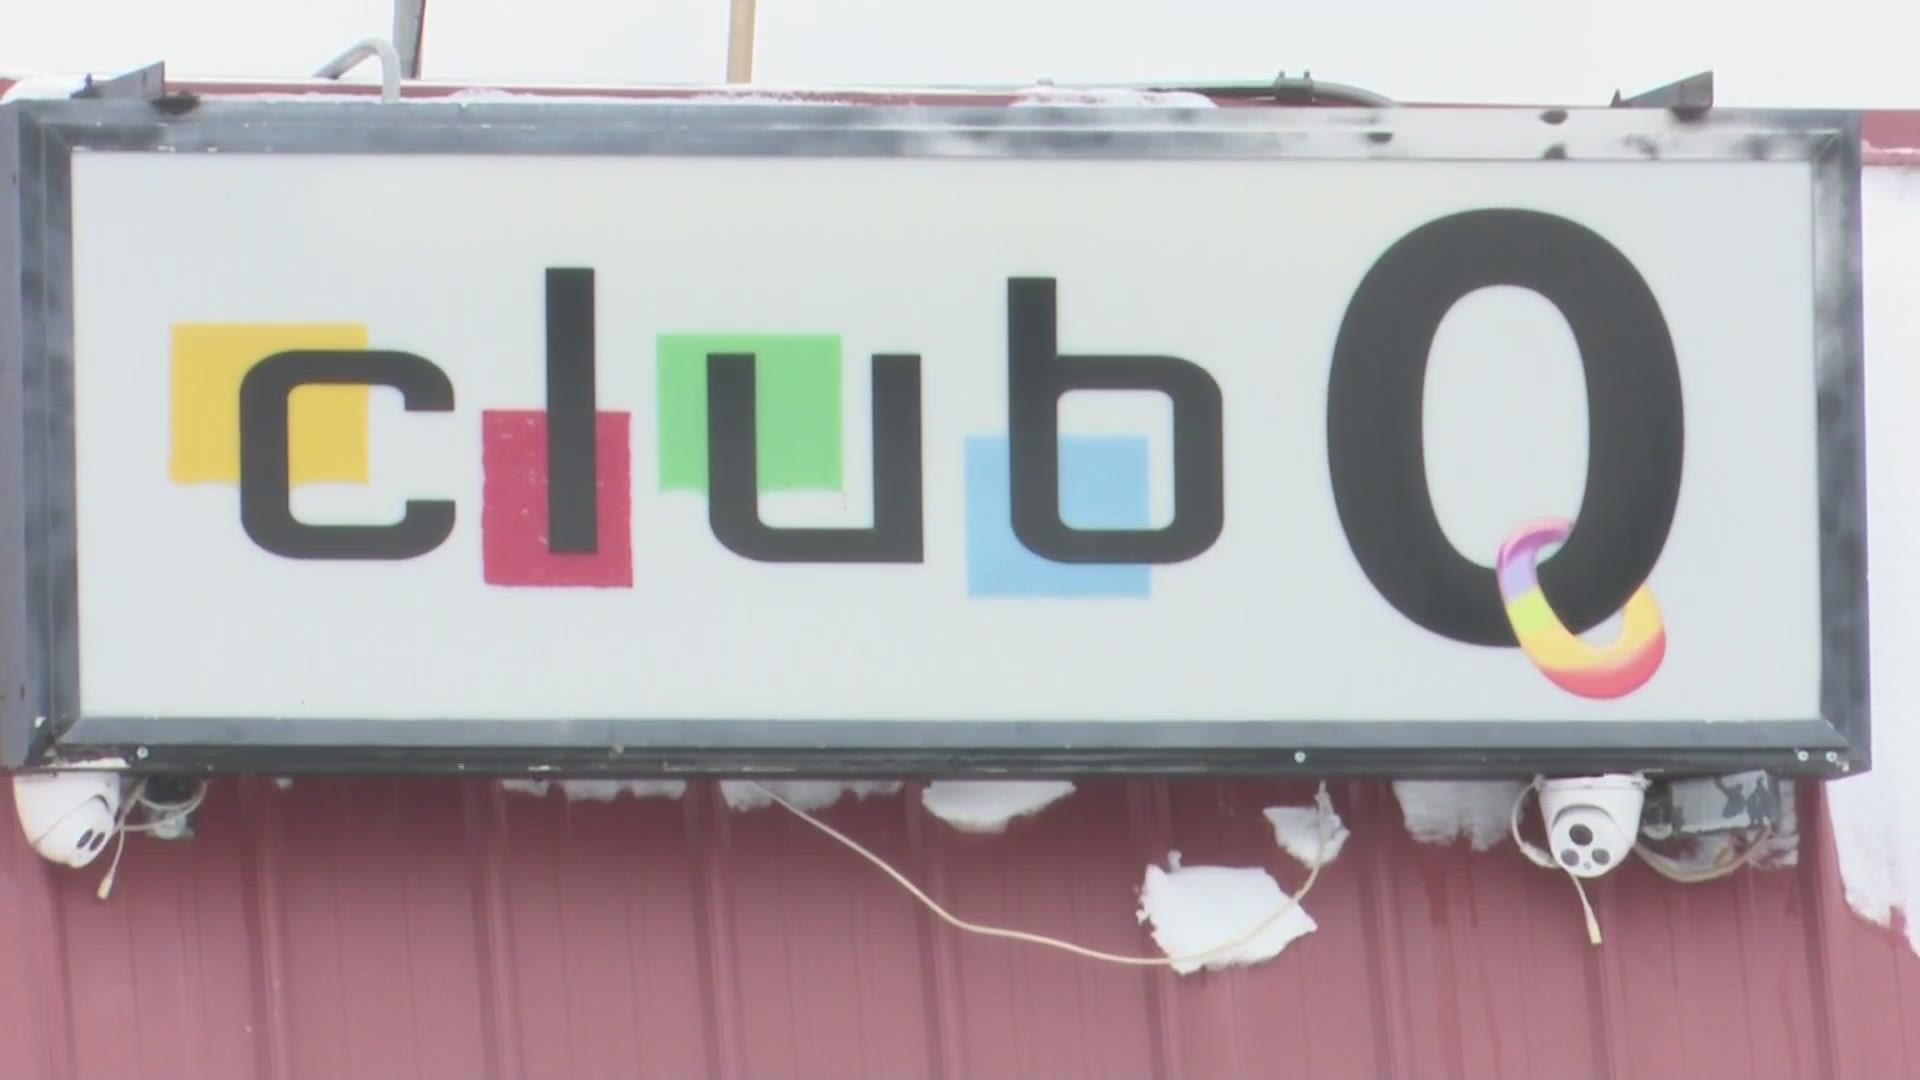 The club plans to start distributing money to staff on Friday.